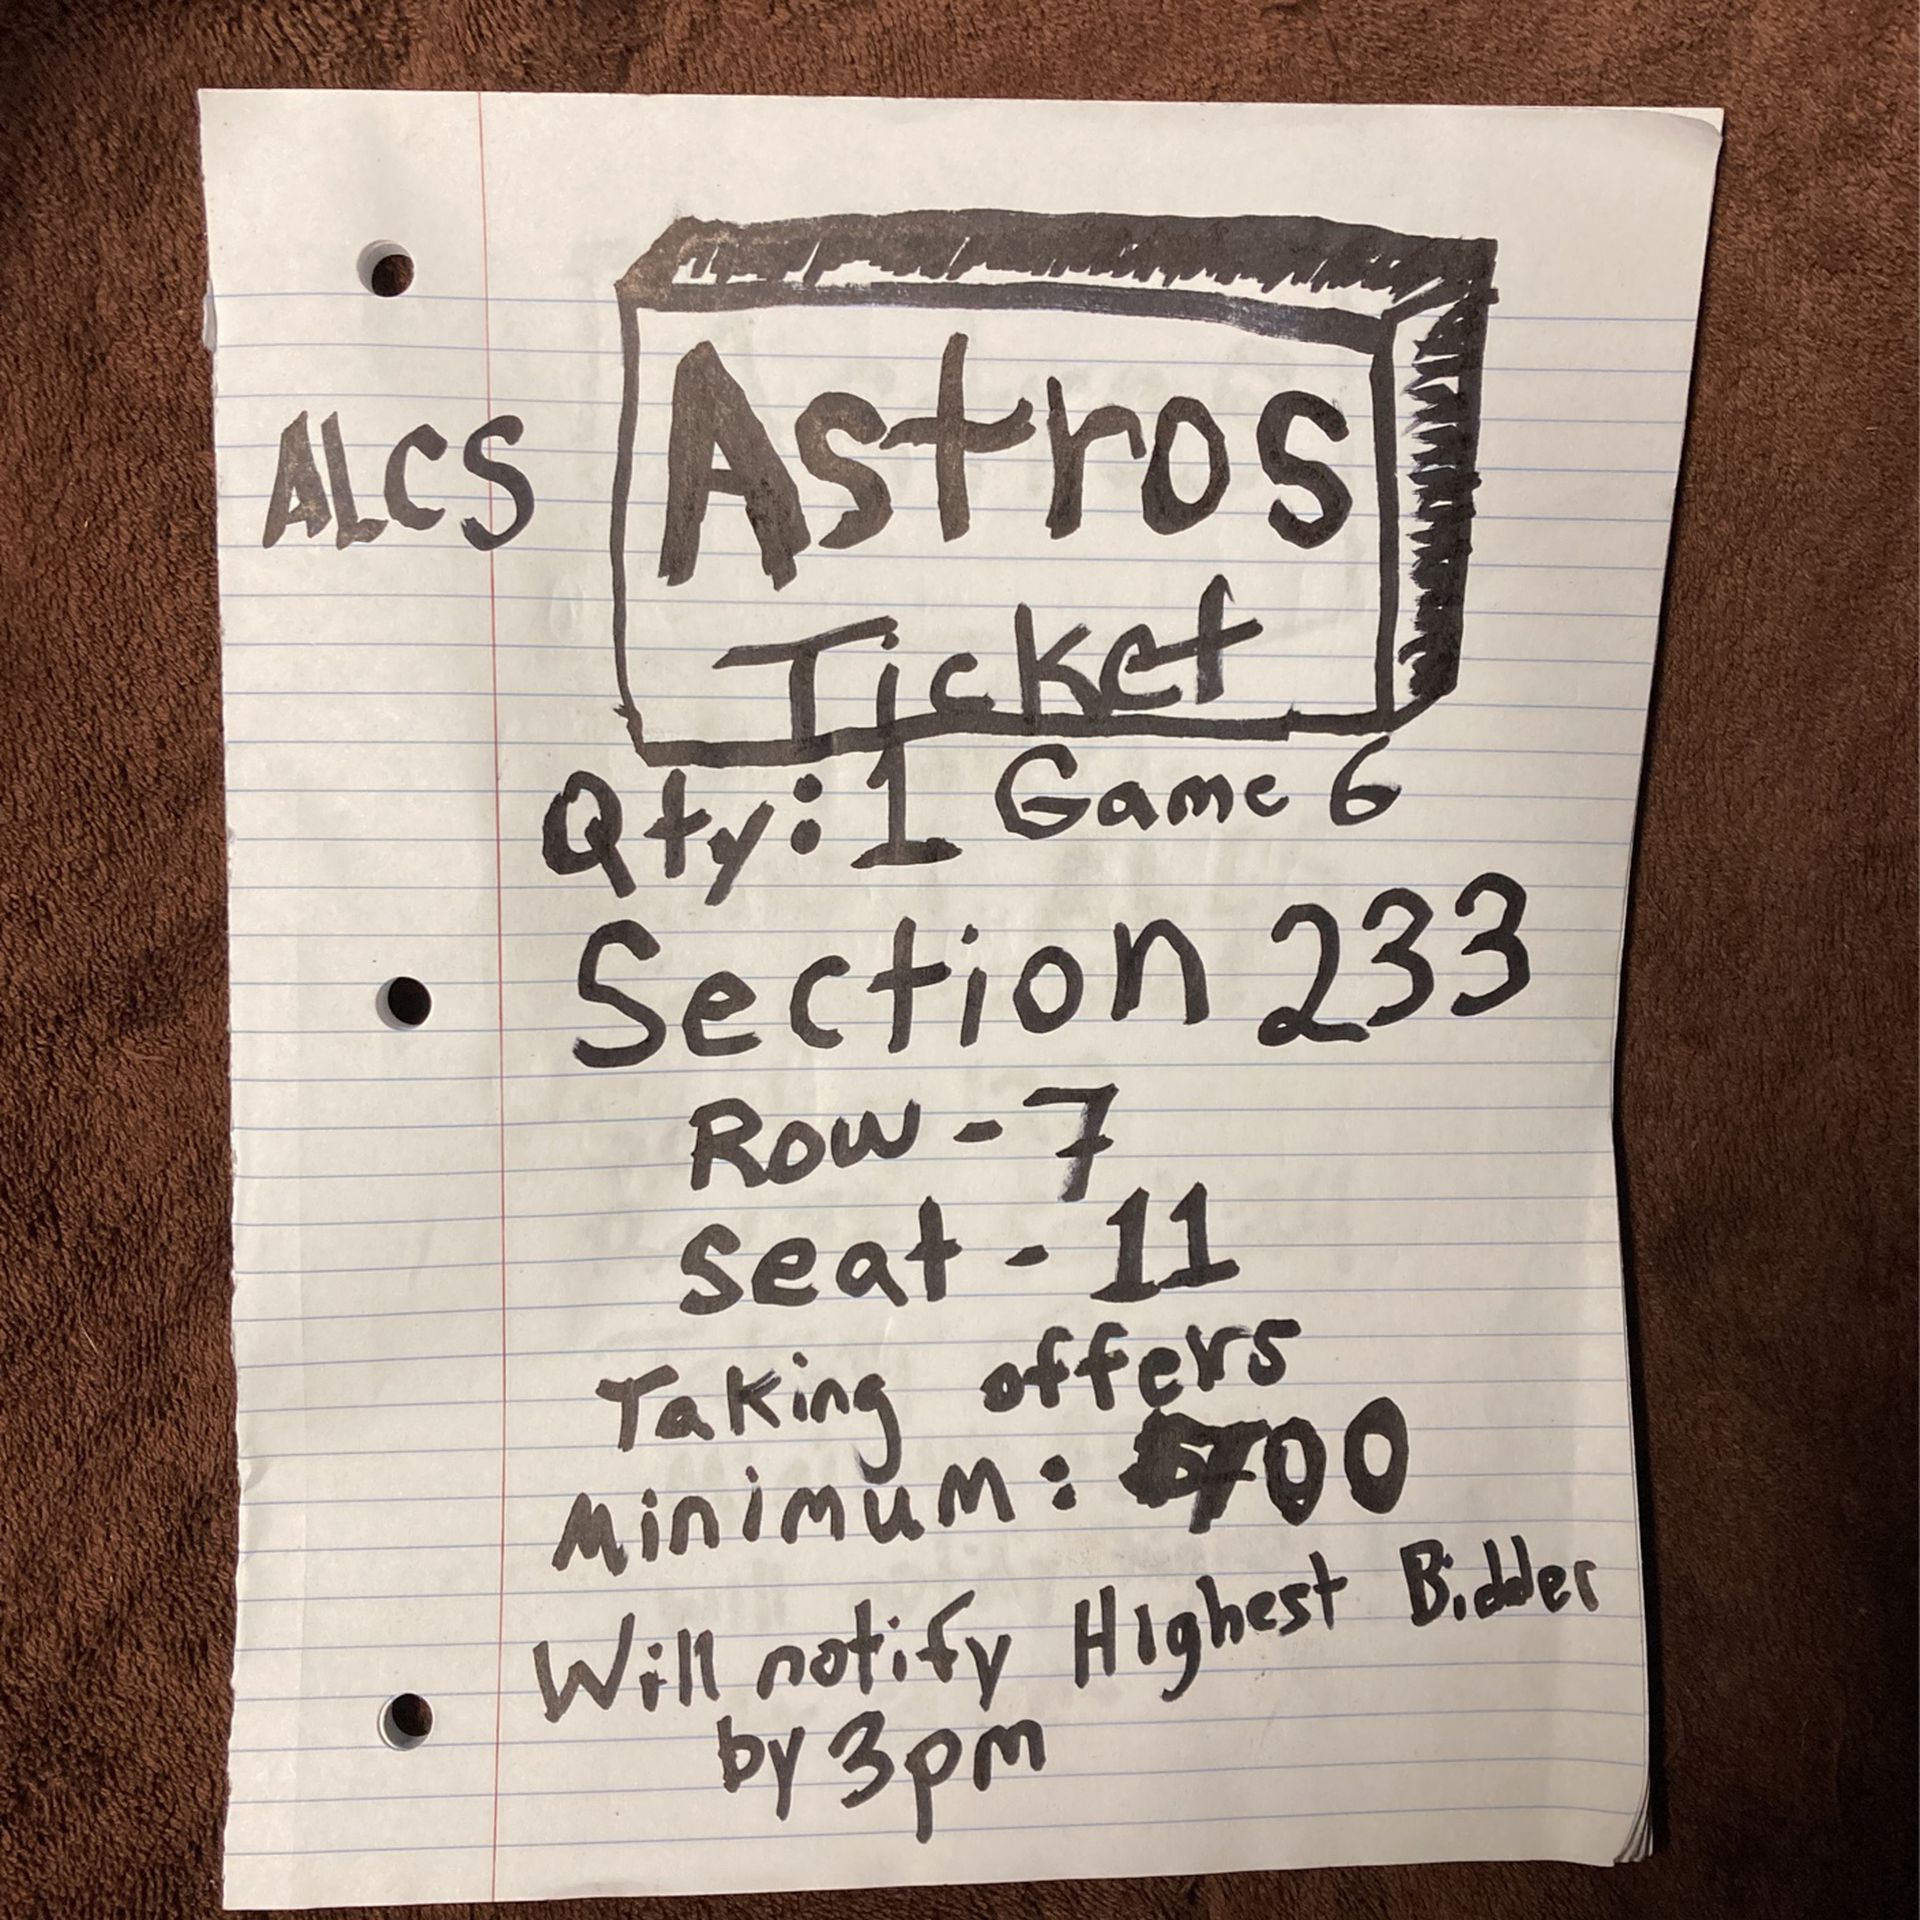 1 Astros ticket ALCS GAME 6 Section 233 